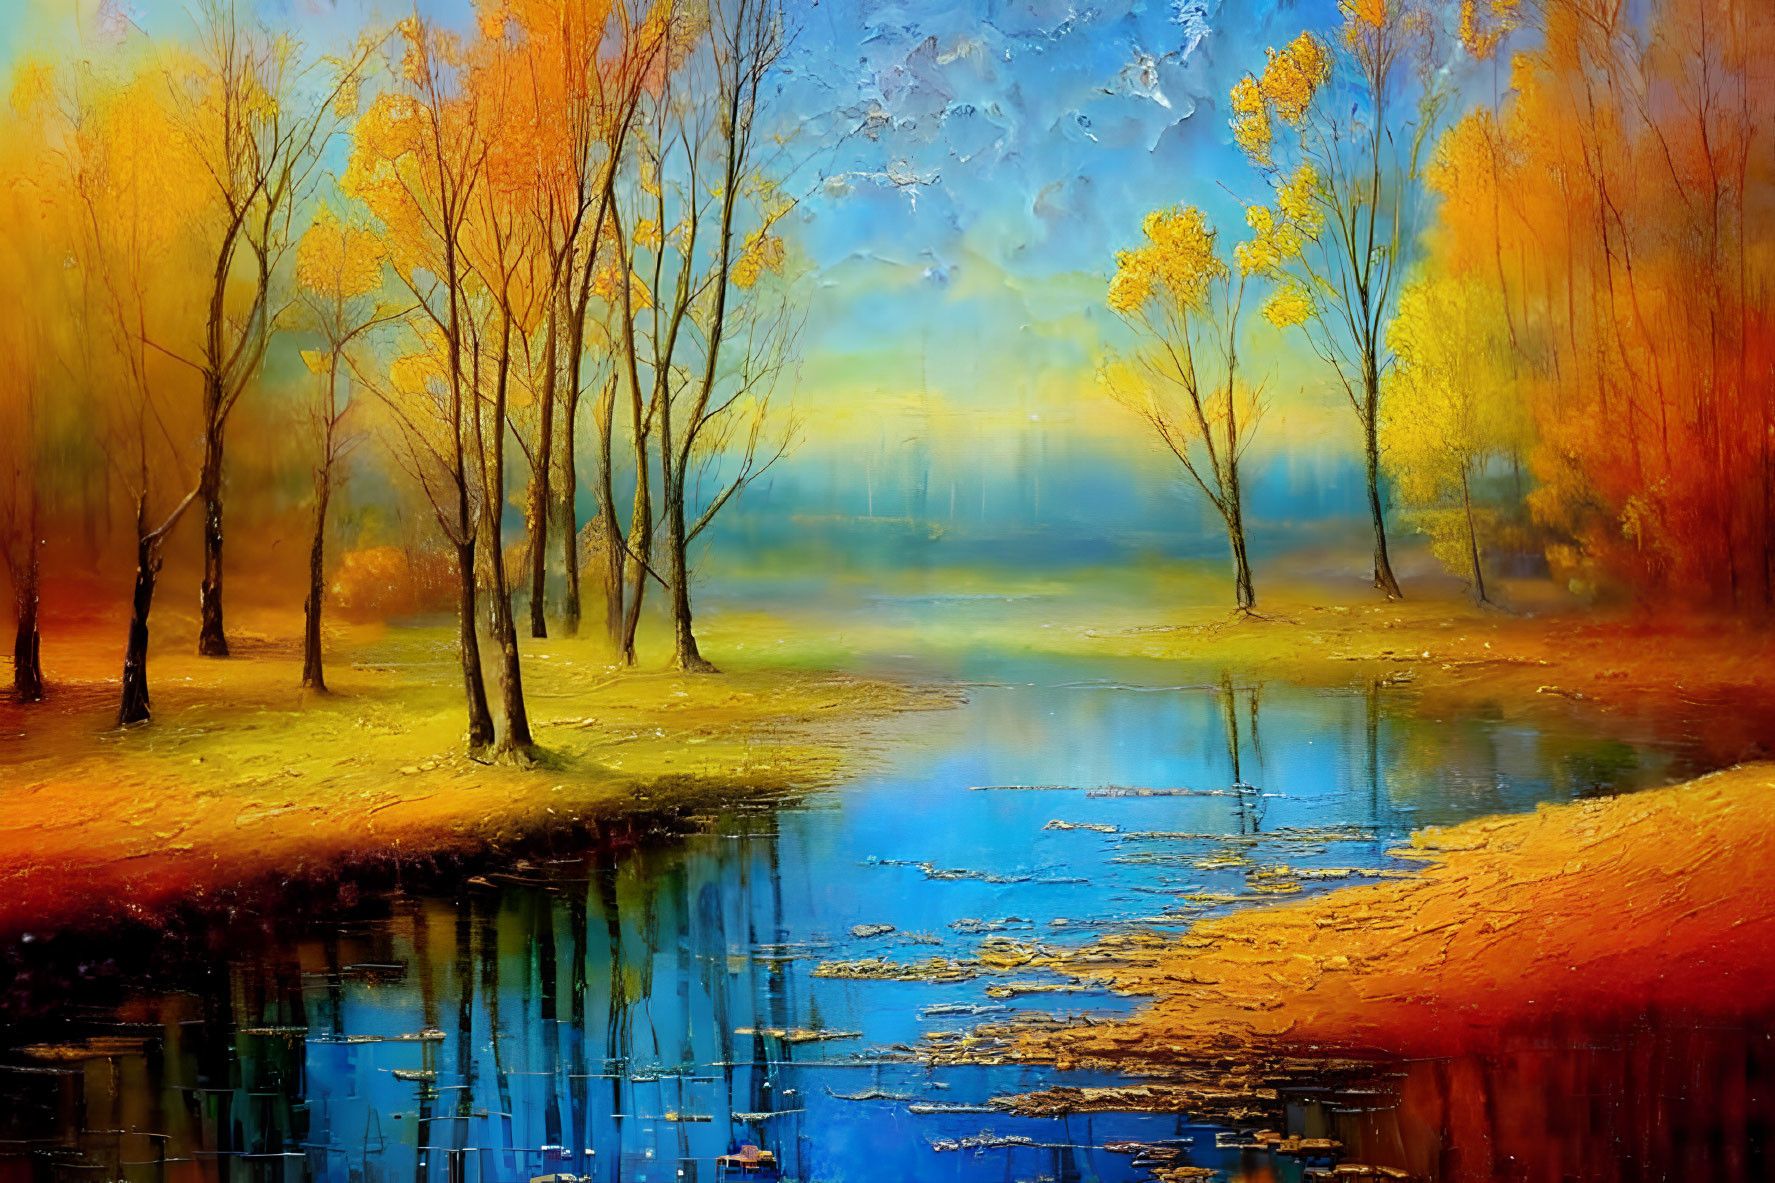 Tranquil autumn river landscape with golden trees